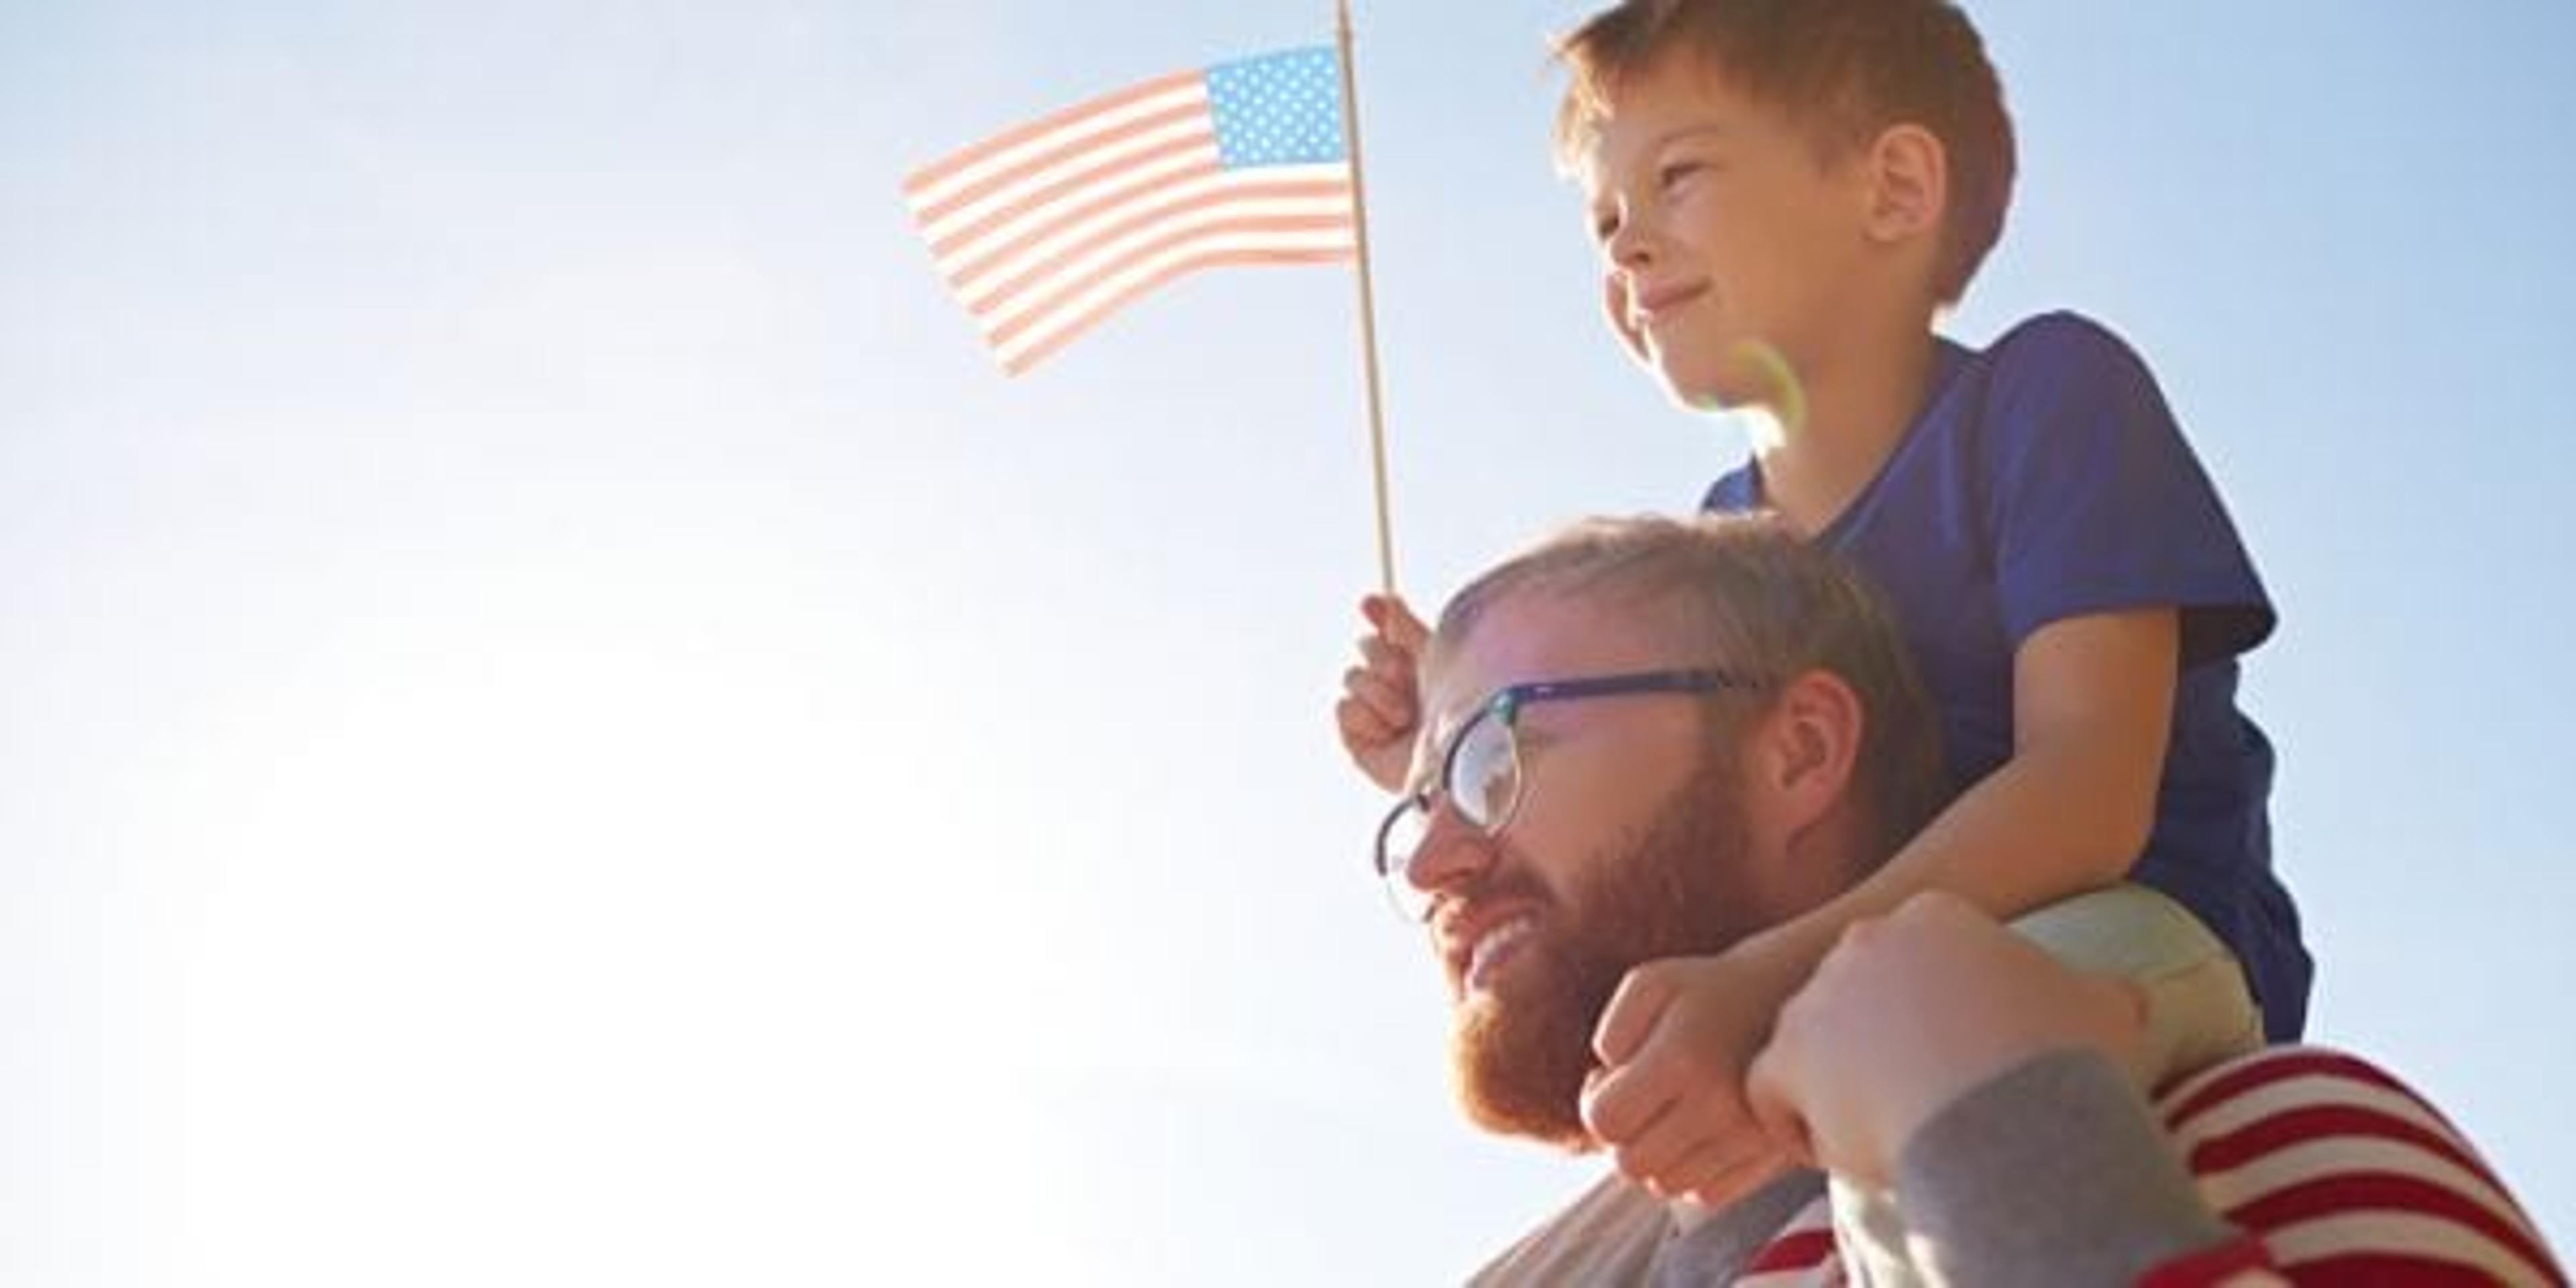 Father and son at parade holding an American flag